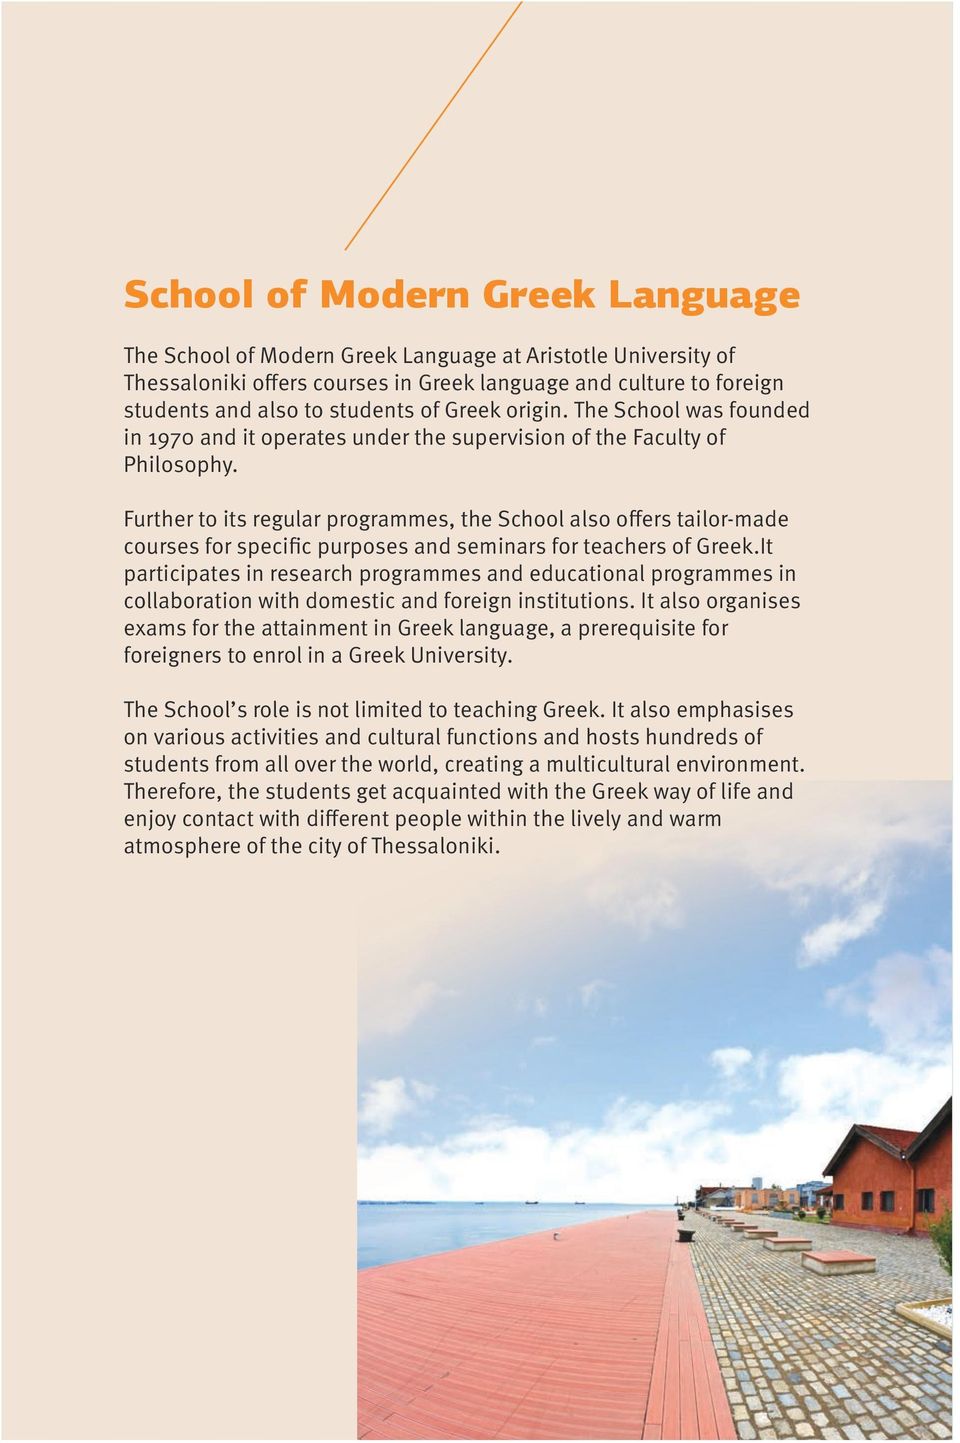 Further to its regular programmes, the School also offers tailor-made courses for specific purposes and seminars for teachers of Greek.